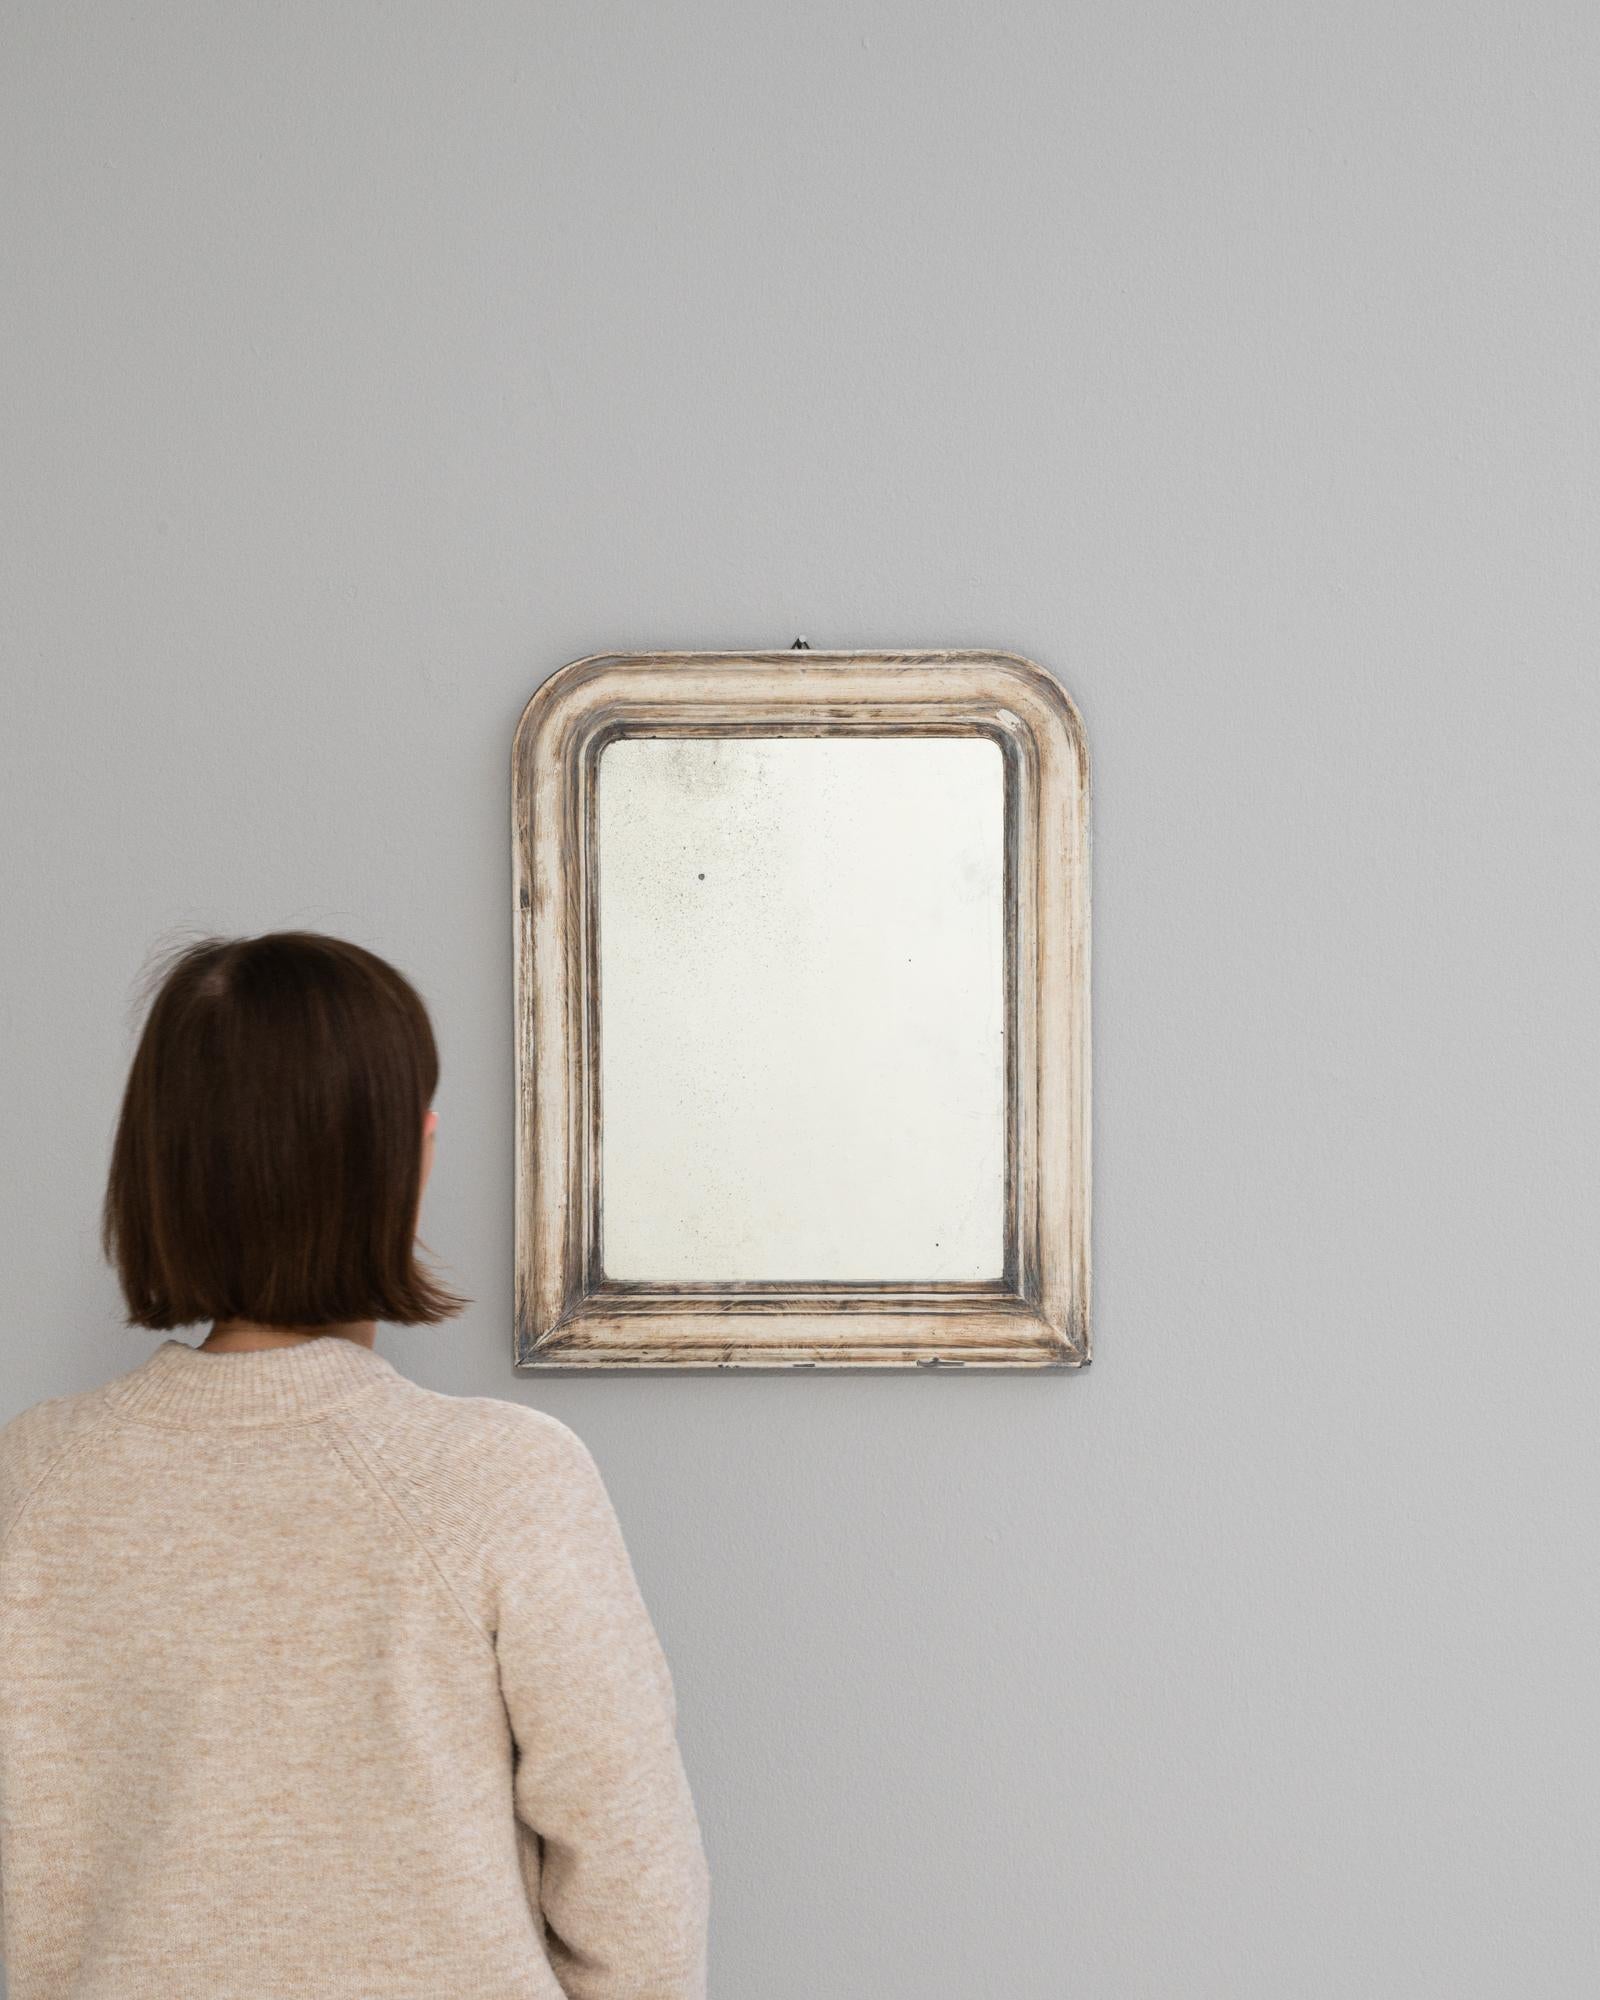 Discover the allure of antique charm with this 19th-century French wooden mirror, adorned with a white patina that tells a story of elegance and time. The gentle, rectangular frame, with its softly curved edges and weathered white finish, brings a